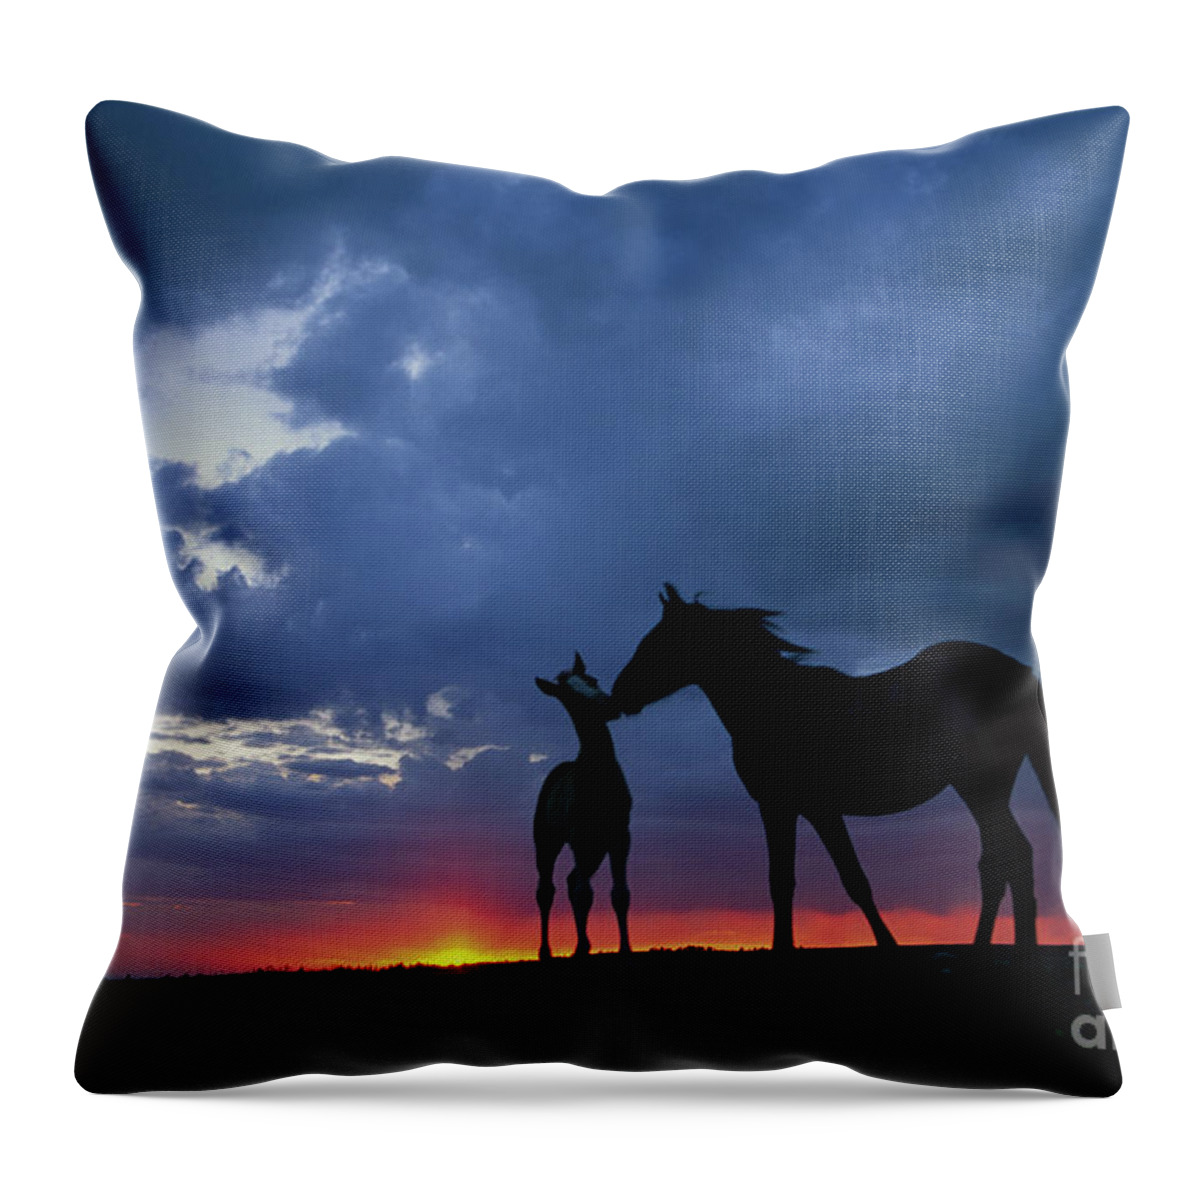 00340054 Throw Pillow featuring the photograph Mustang and Foal at Sunset by Yva Momatiuk John Eastcott